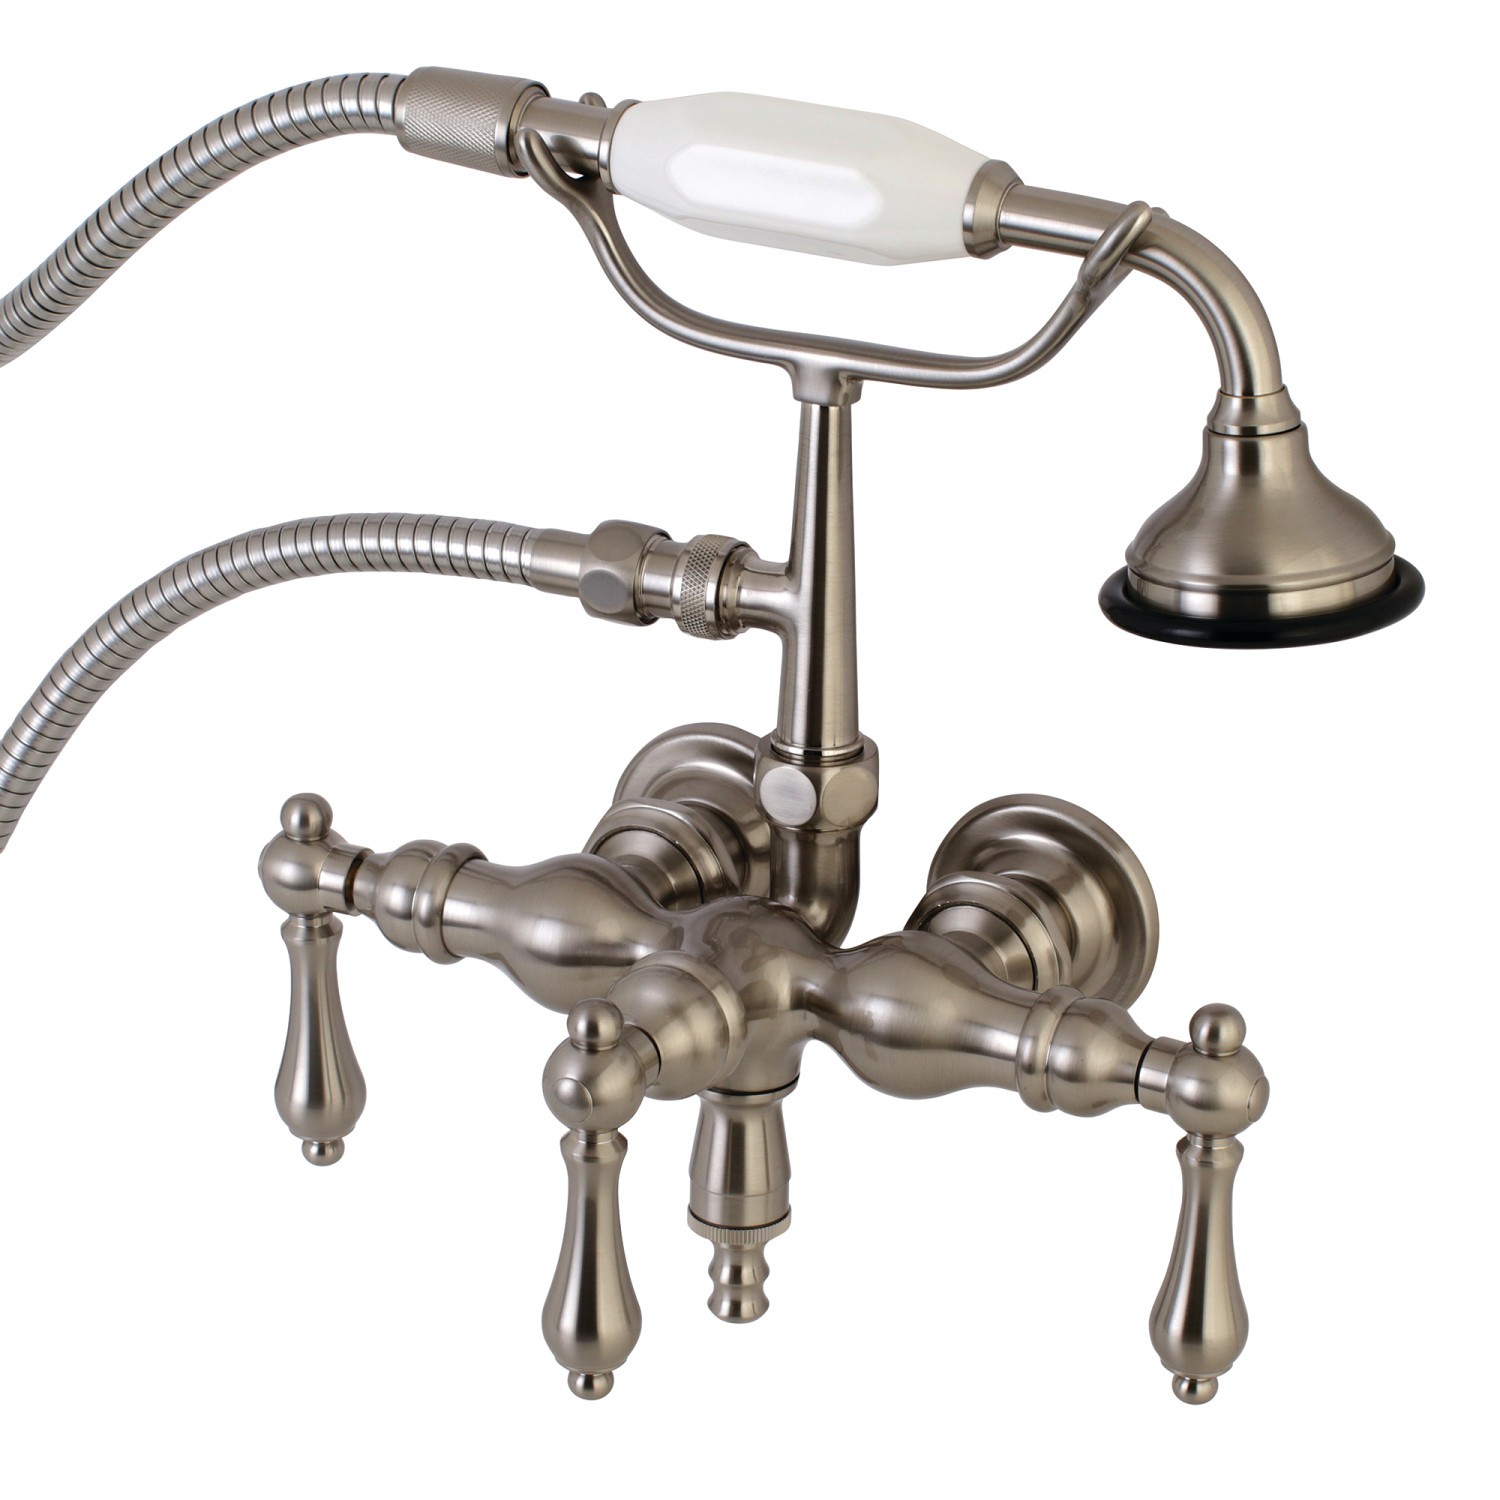 KINGSTON BRASS AE19T VINTAGE WALL MOUNT CLAWFOOT TUB FAUCET WITH HAND SHOWER